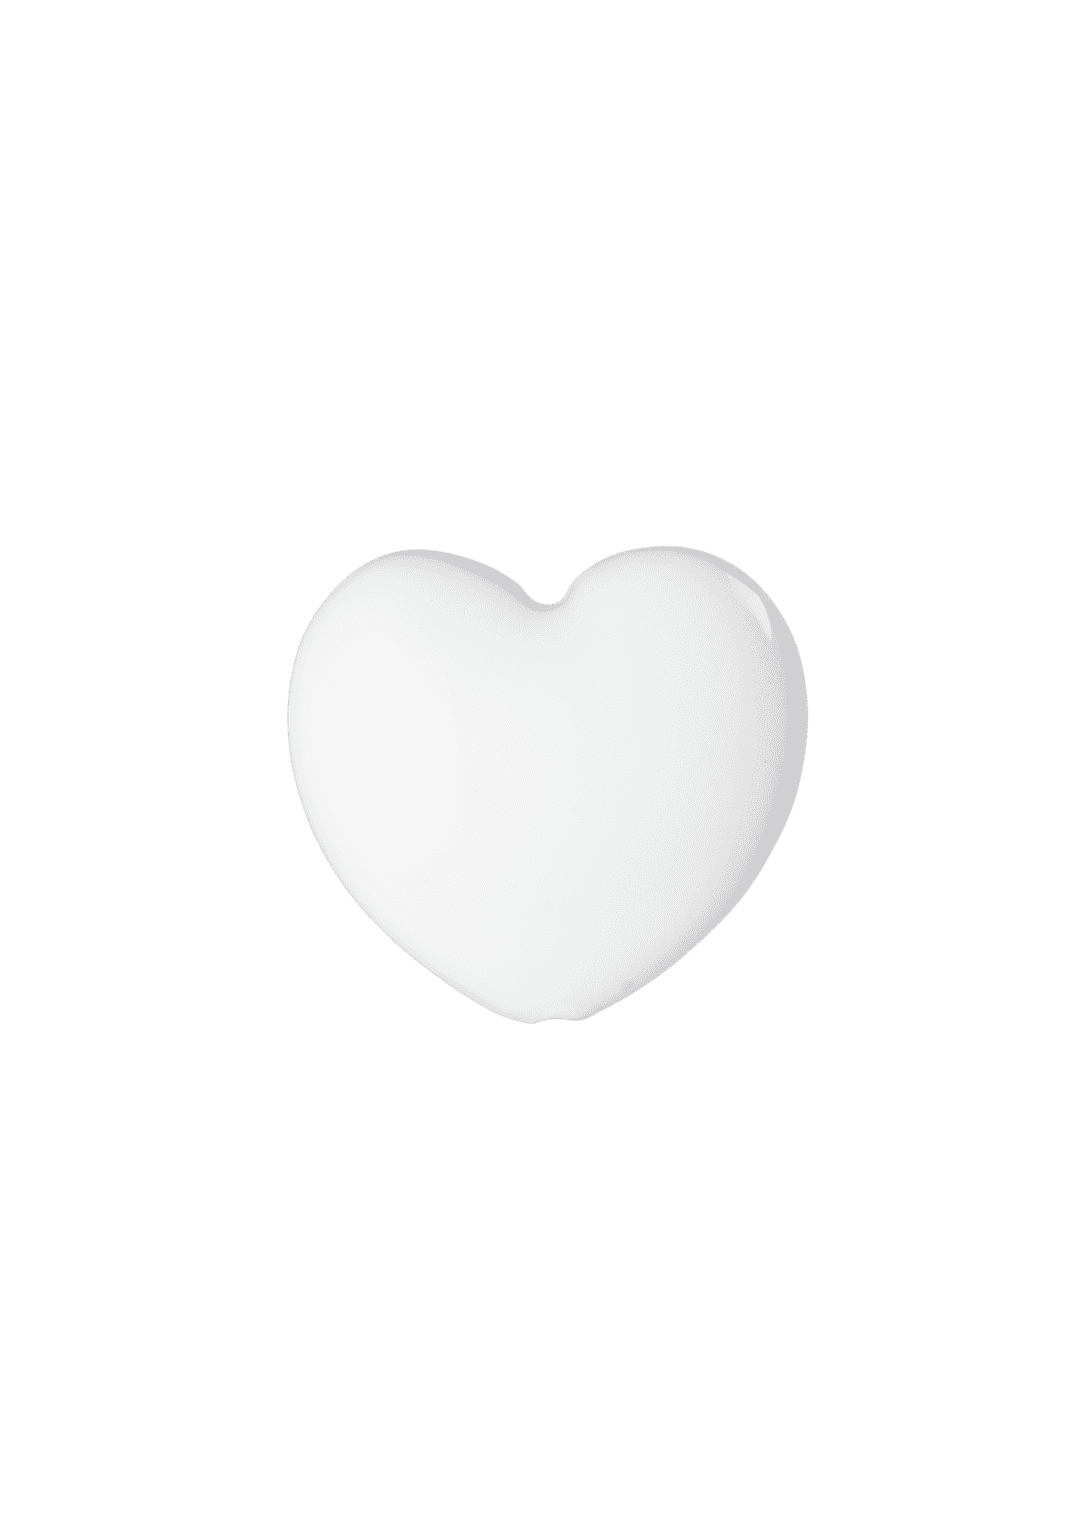 Nordic Tales Heart glossy white H4.6 H: 1.8" W: 2" D: 1"